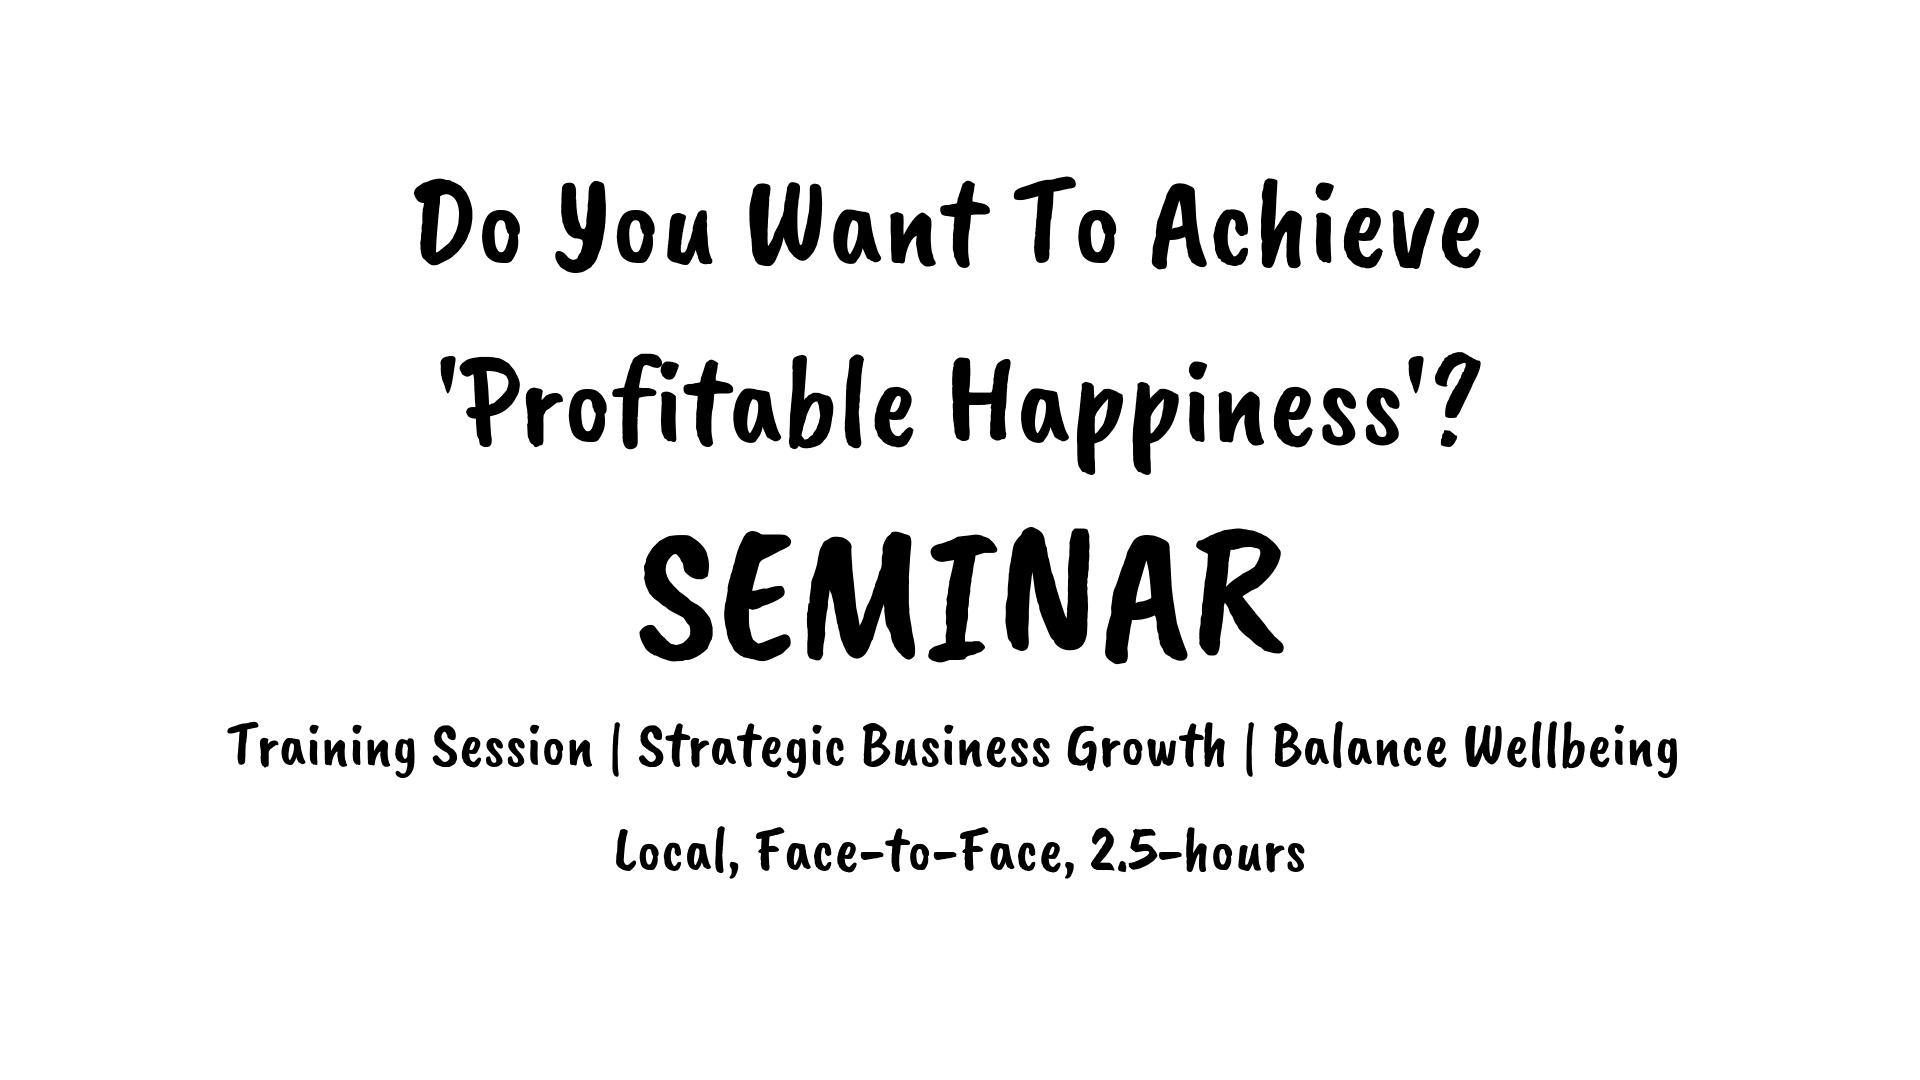 SEMINAR [2.5hrs | SYD] Do You Want To Achieve Profitable Happiness?